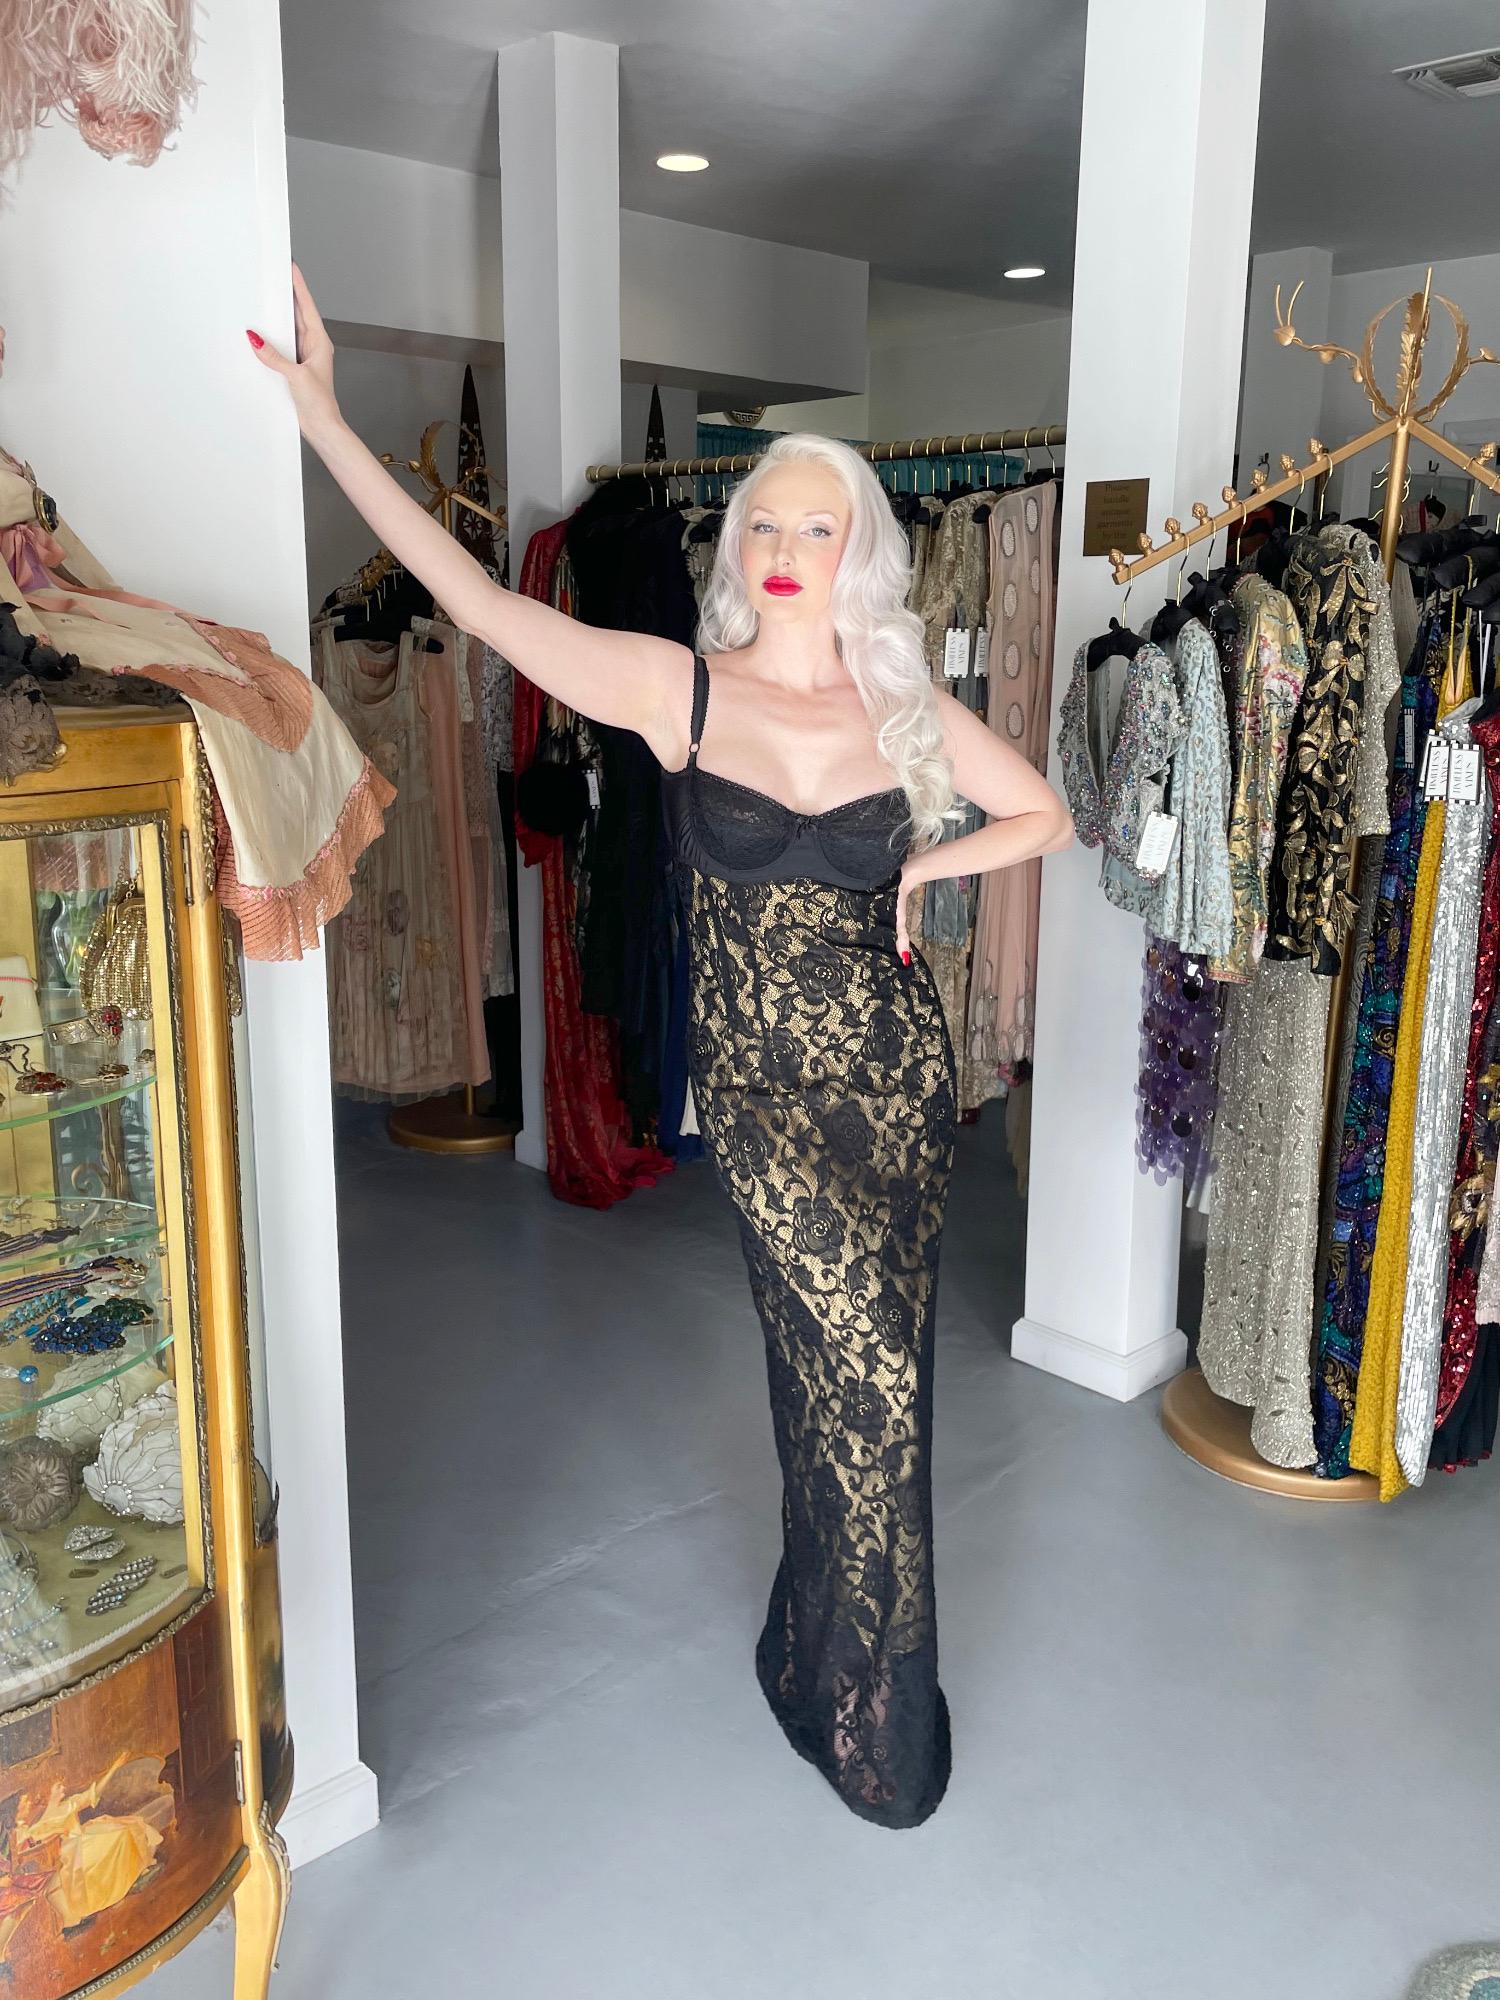 An instantly recognizable and ultra seductive Dolce & Gabbana sheer black stretch cotton-lace full length slip dating back to their coveted 1997 spring/summer collection. As pictured, Madonna wore a gown from the same collection when winning Best